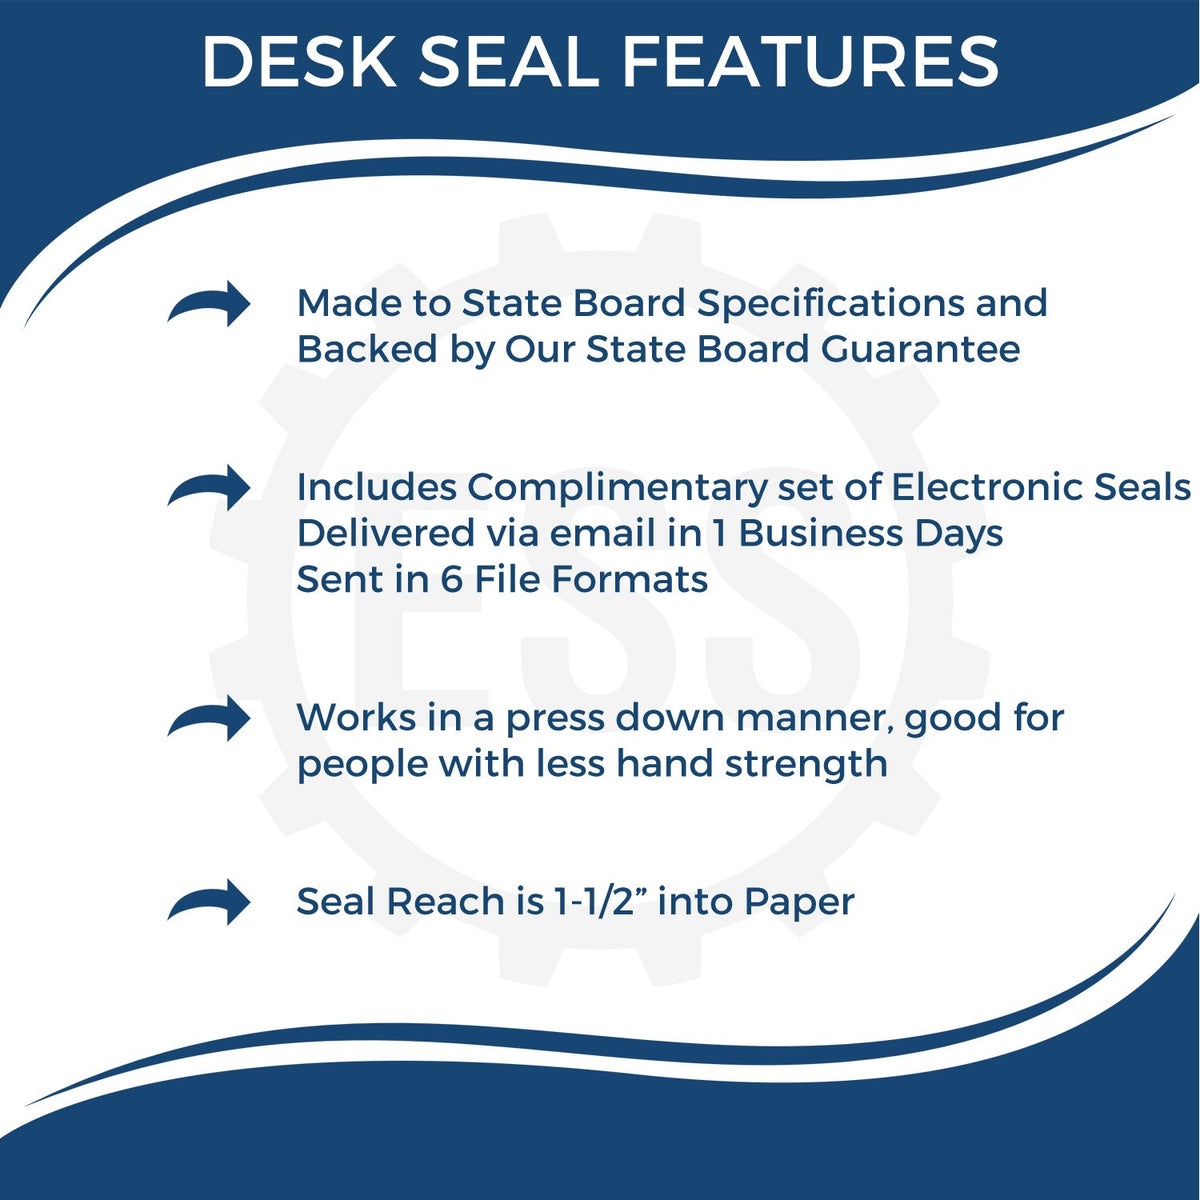 A picture of an infographic highlighting the selling points for the New Hampshire Geologist Desk Seal